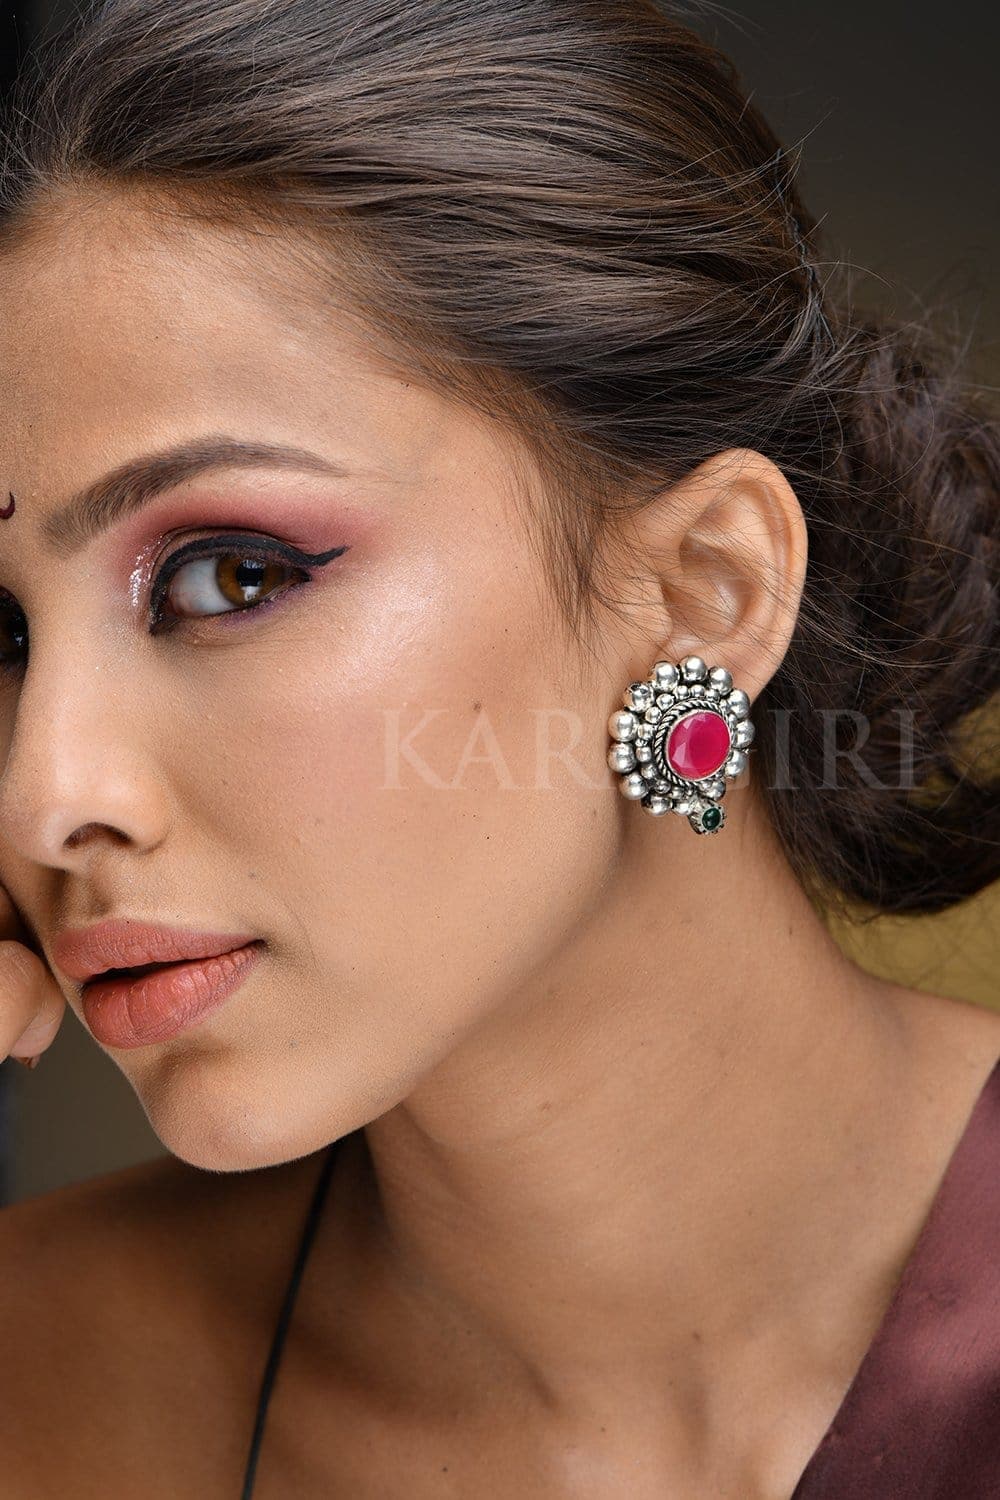 Kangna Ranaut Earrings, Light Weight Gold & Clear Stone Stud Earrings,  Indian Bollywood Ethnic Ear Stud - Etsy